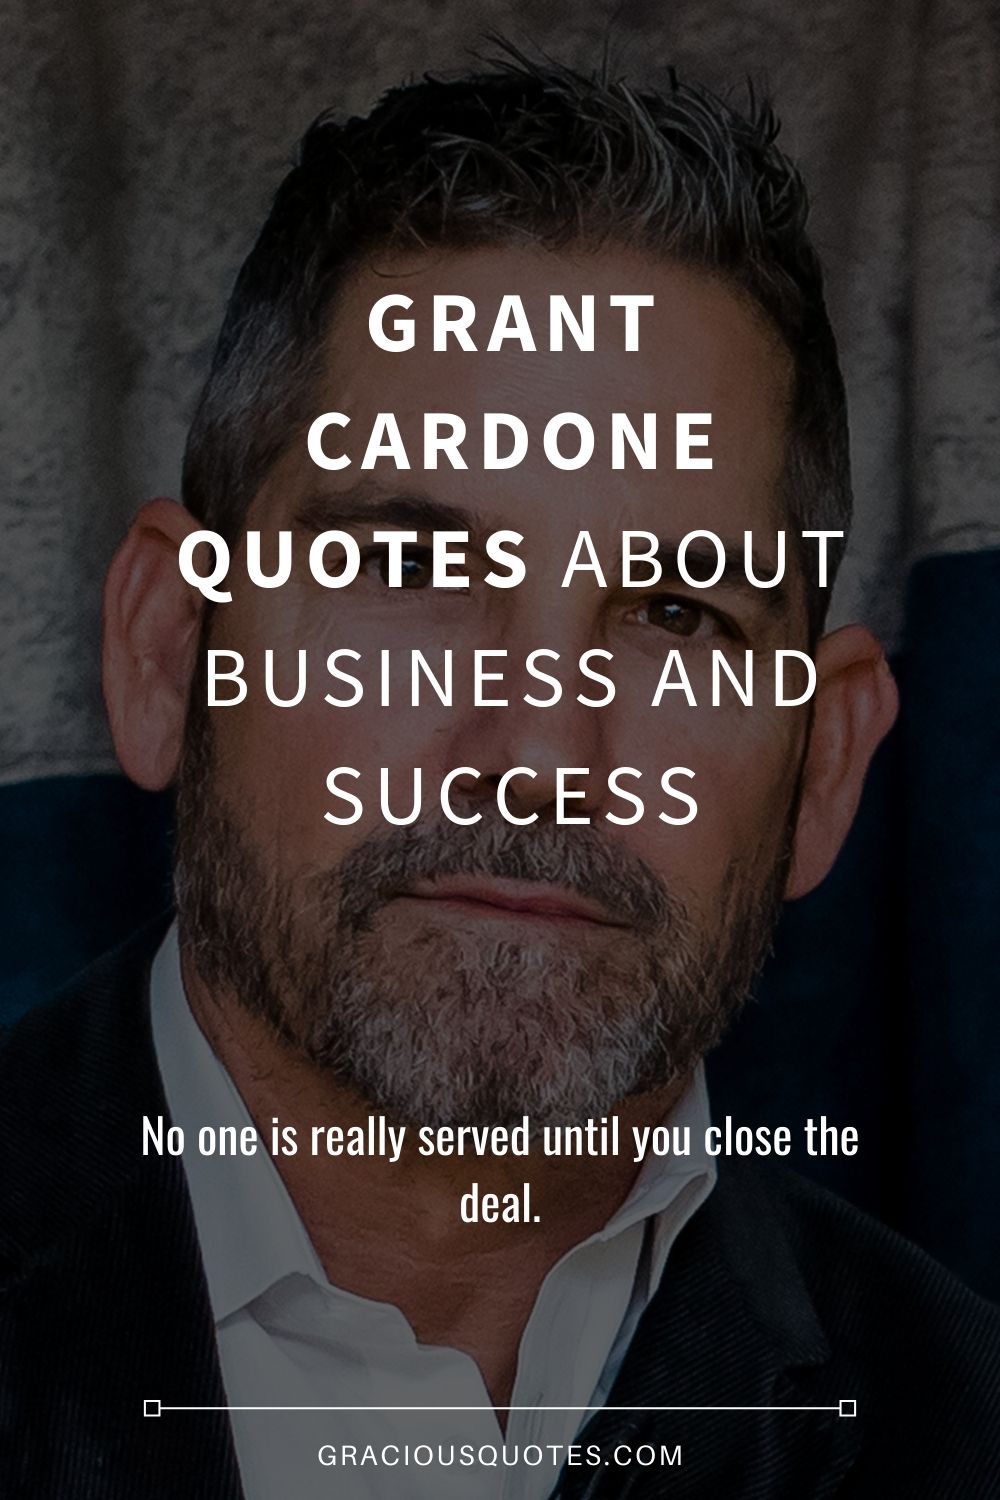 Grant-Cardone-Quotes-About-Business-And-Success-Gracious-Quotes